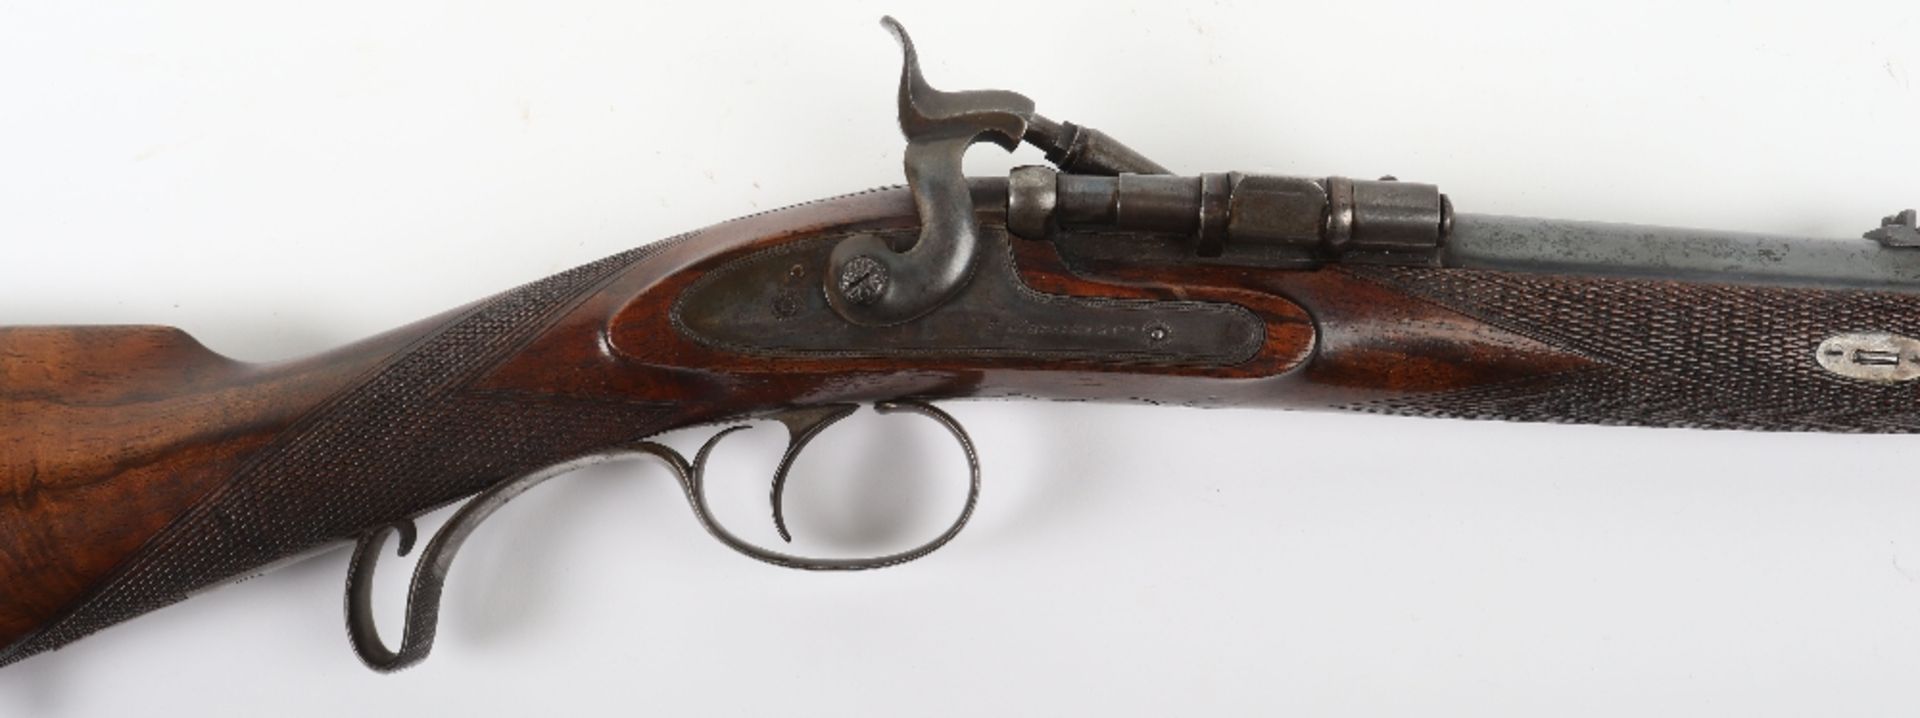 25-Bore Snider Action Breech Loading Sporting Rifle by Reilly No. 15227